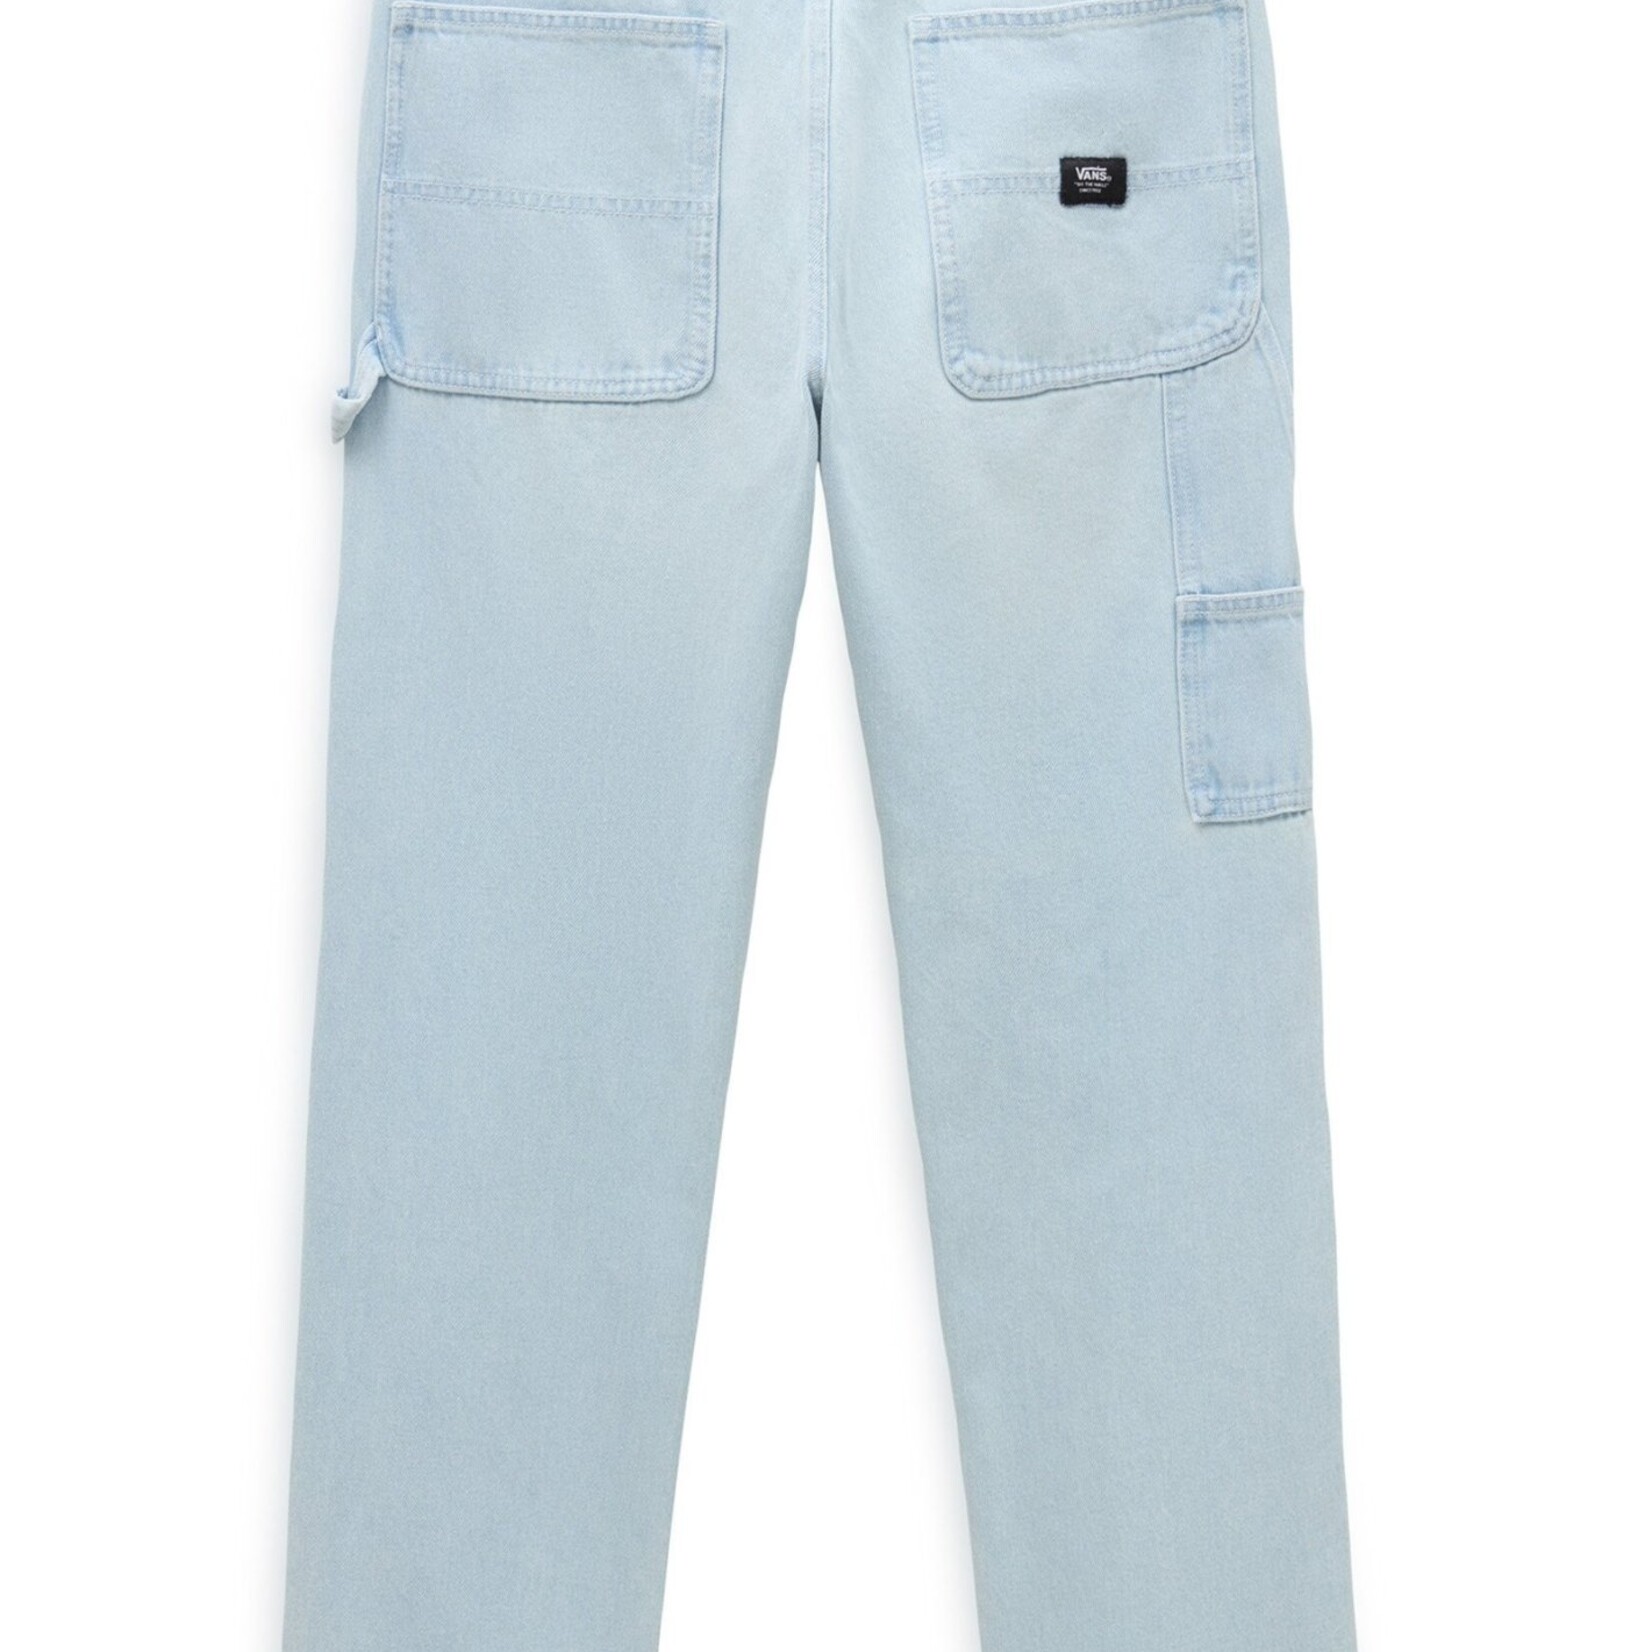 Vans DRILL CHORE - Relaxed fit jeans - VANS